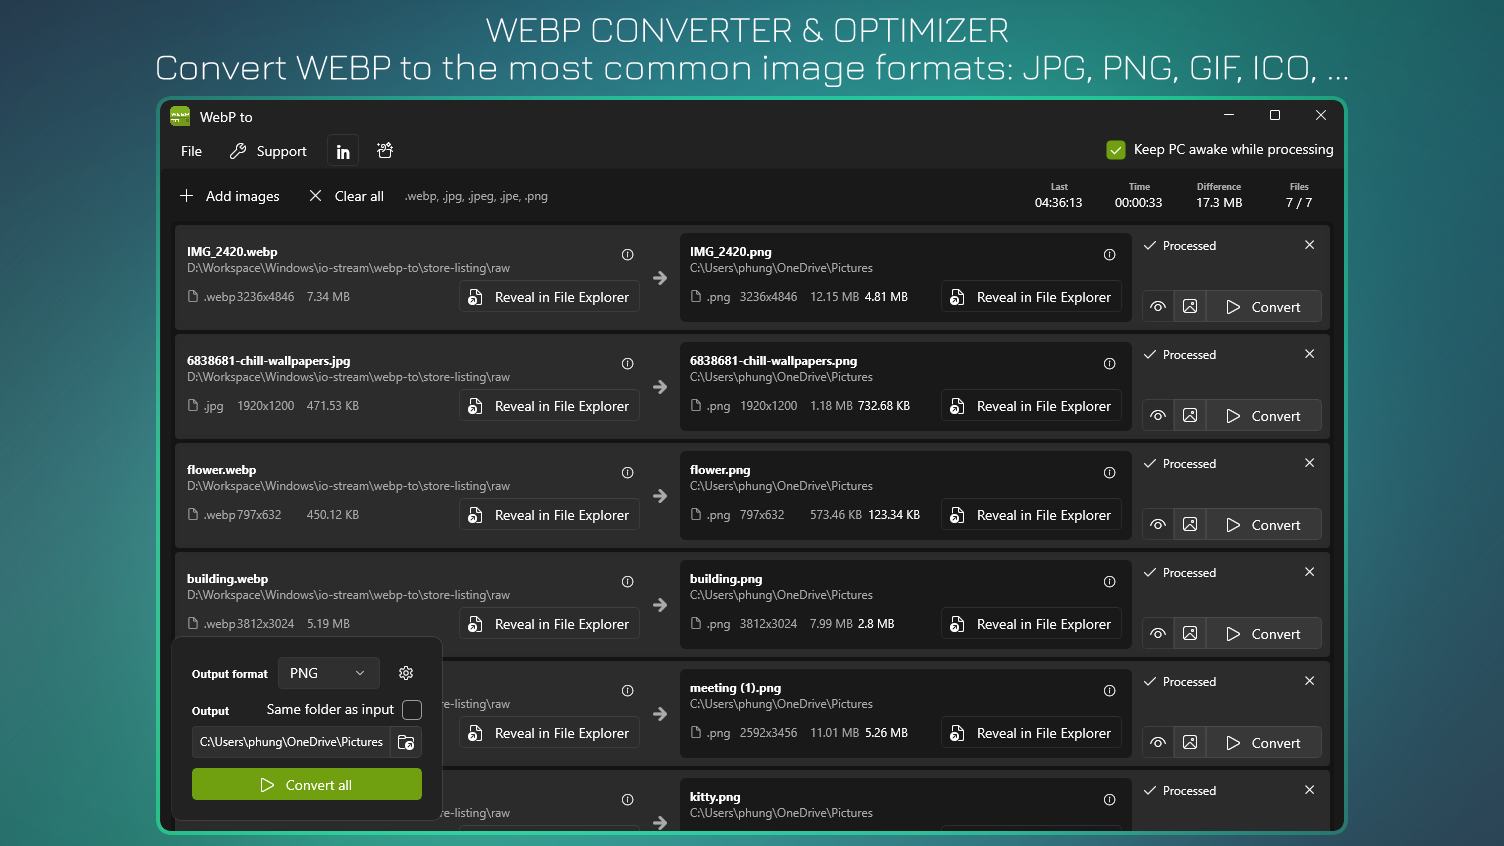 WebP Converter & Optimizer - Convert WebP to the most common image formats: JPG, PNG, GIF, ICO...